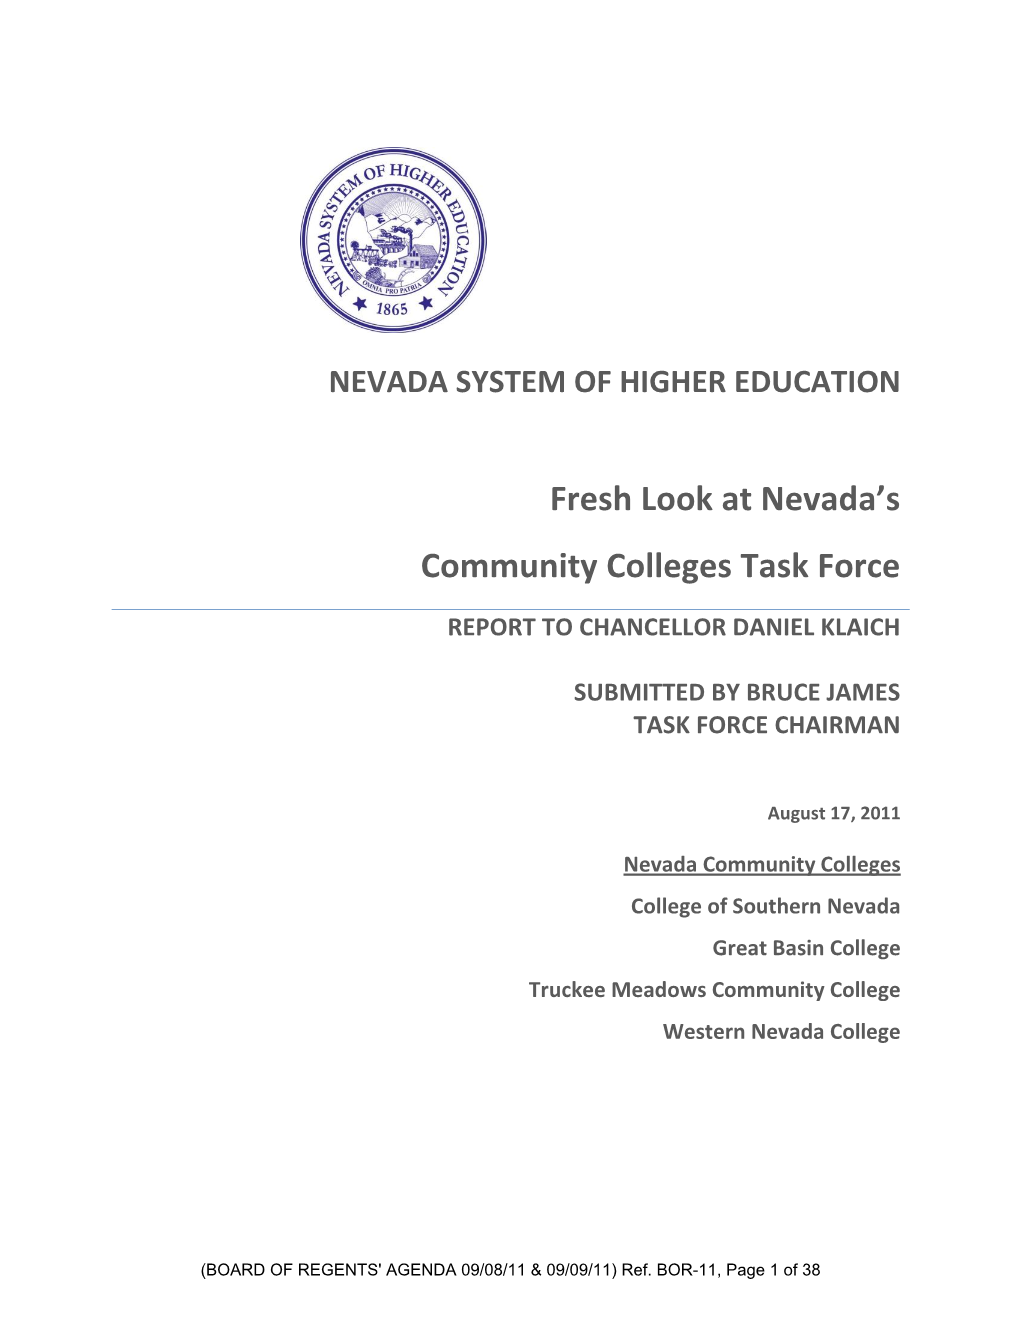 Fresh Look at Nevada's Community Colleges Task Force